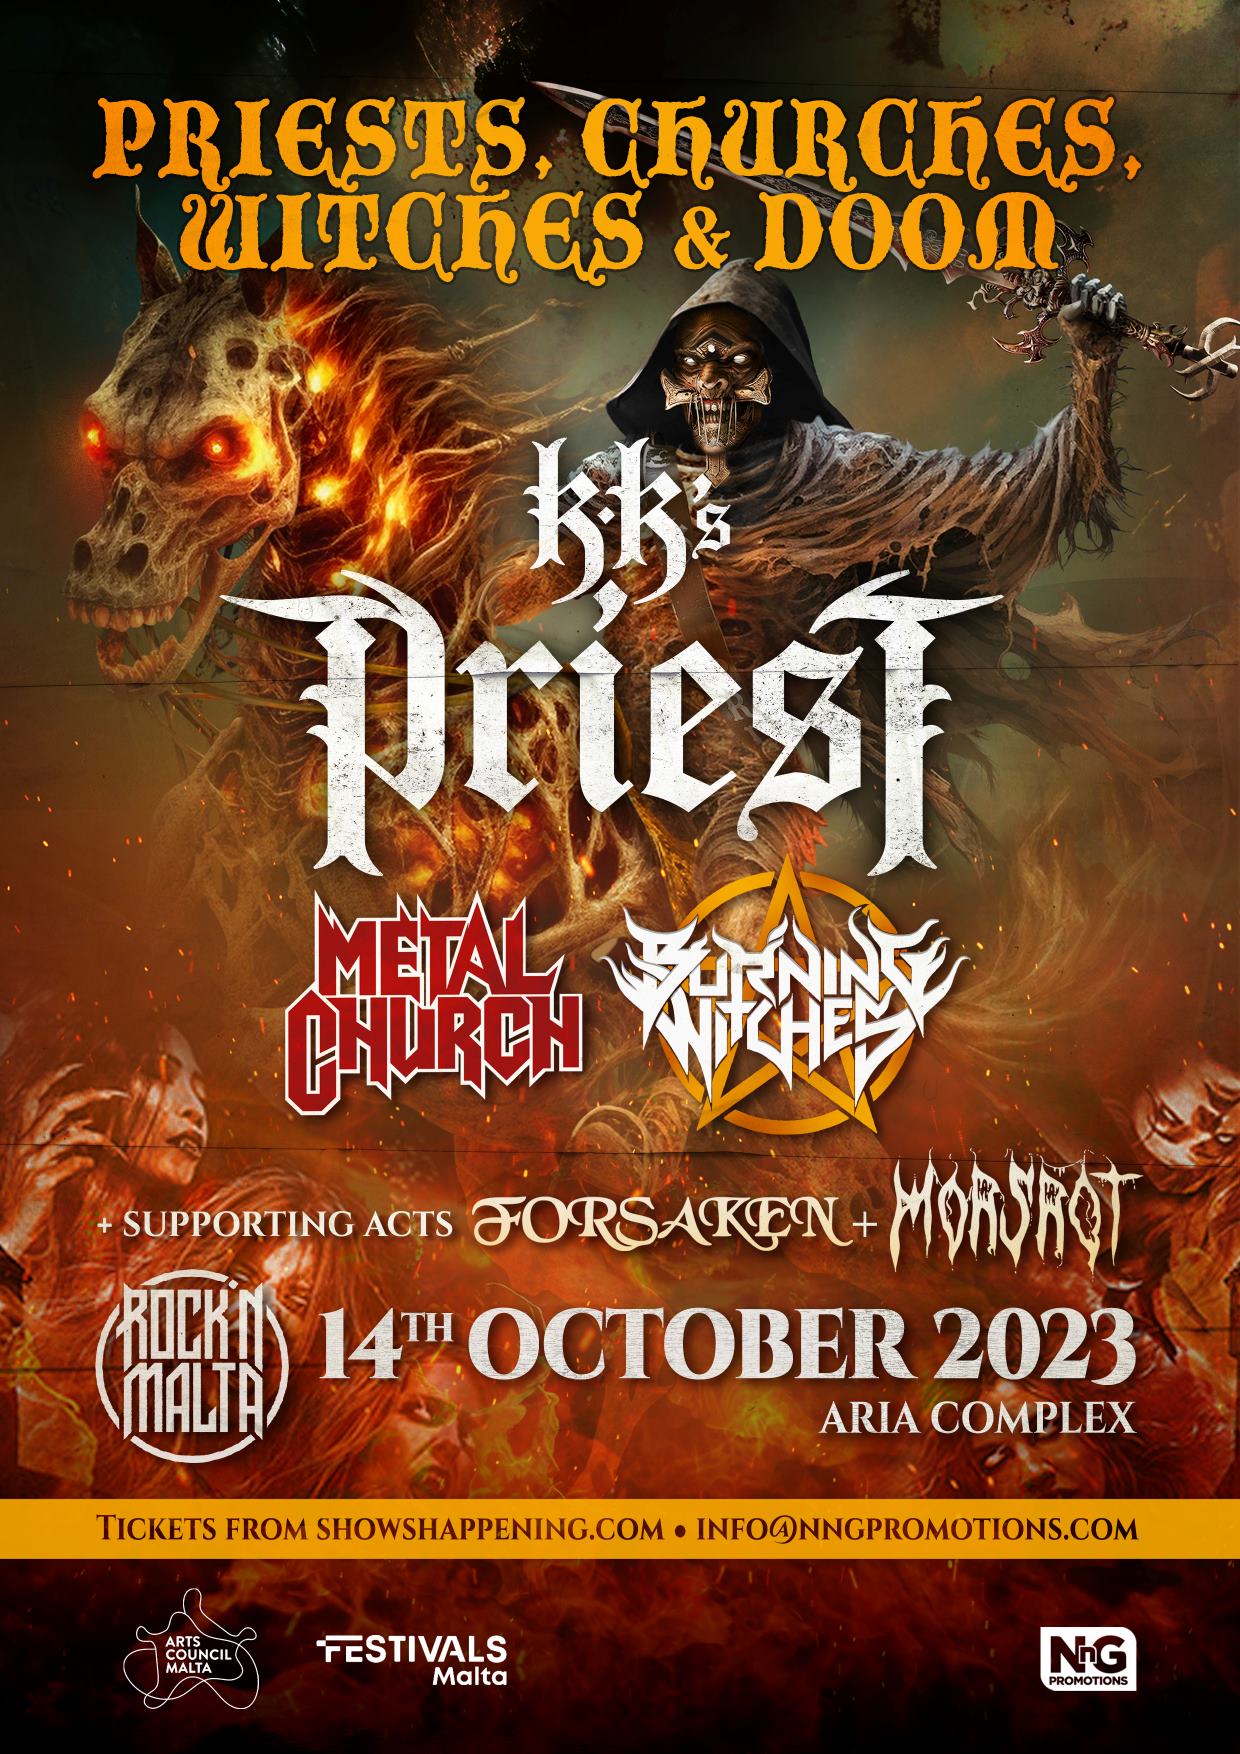 KK’s Priest, Metal Church and Burning Witches poster